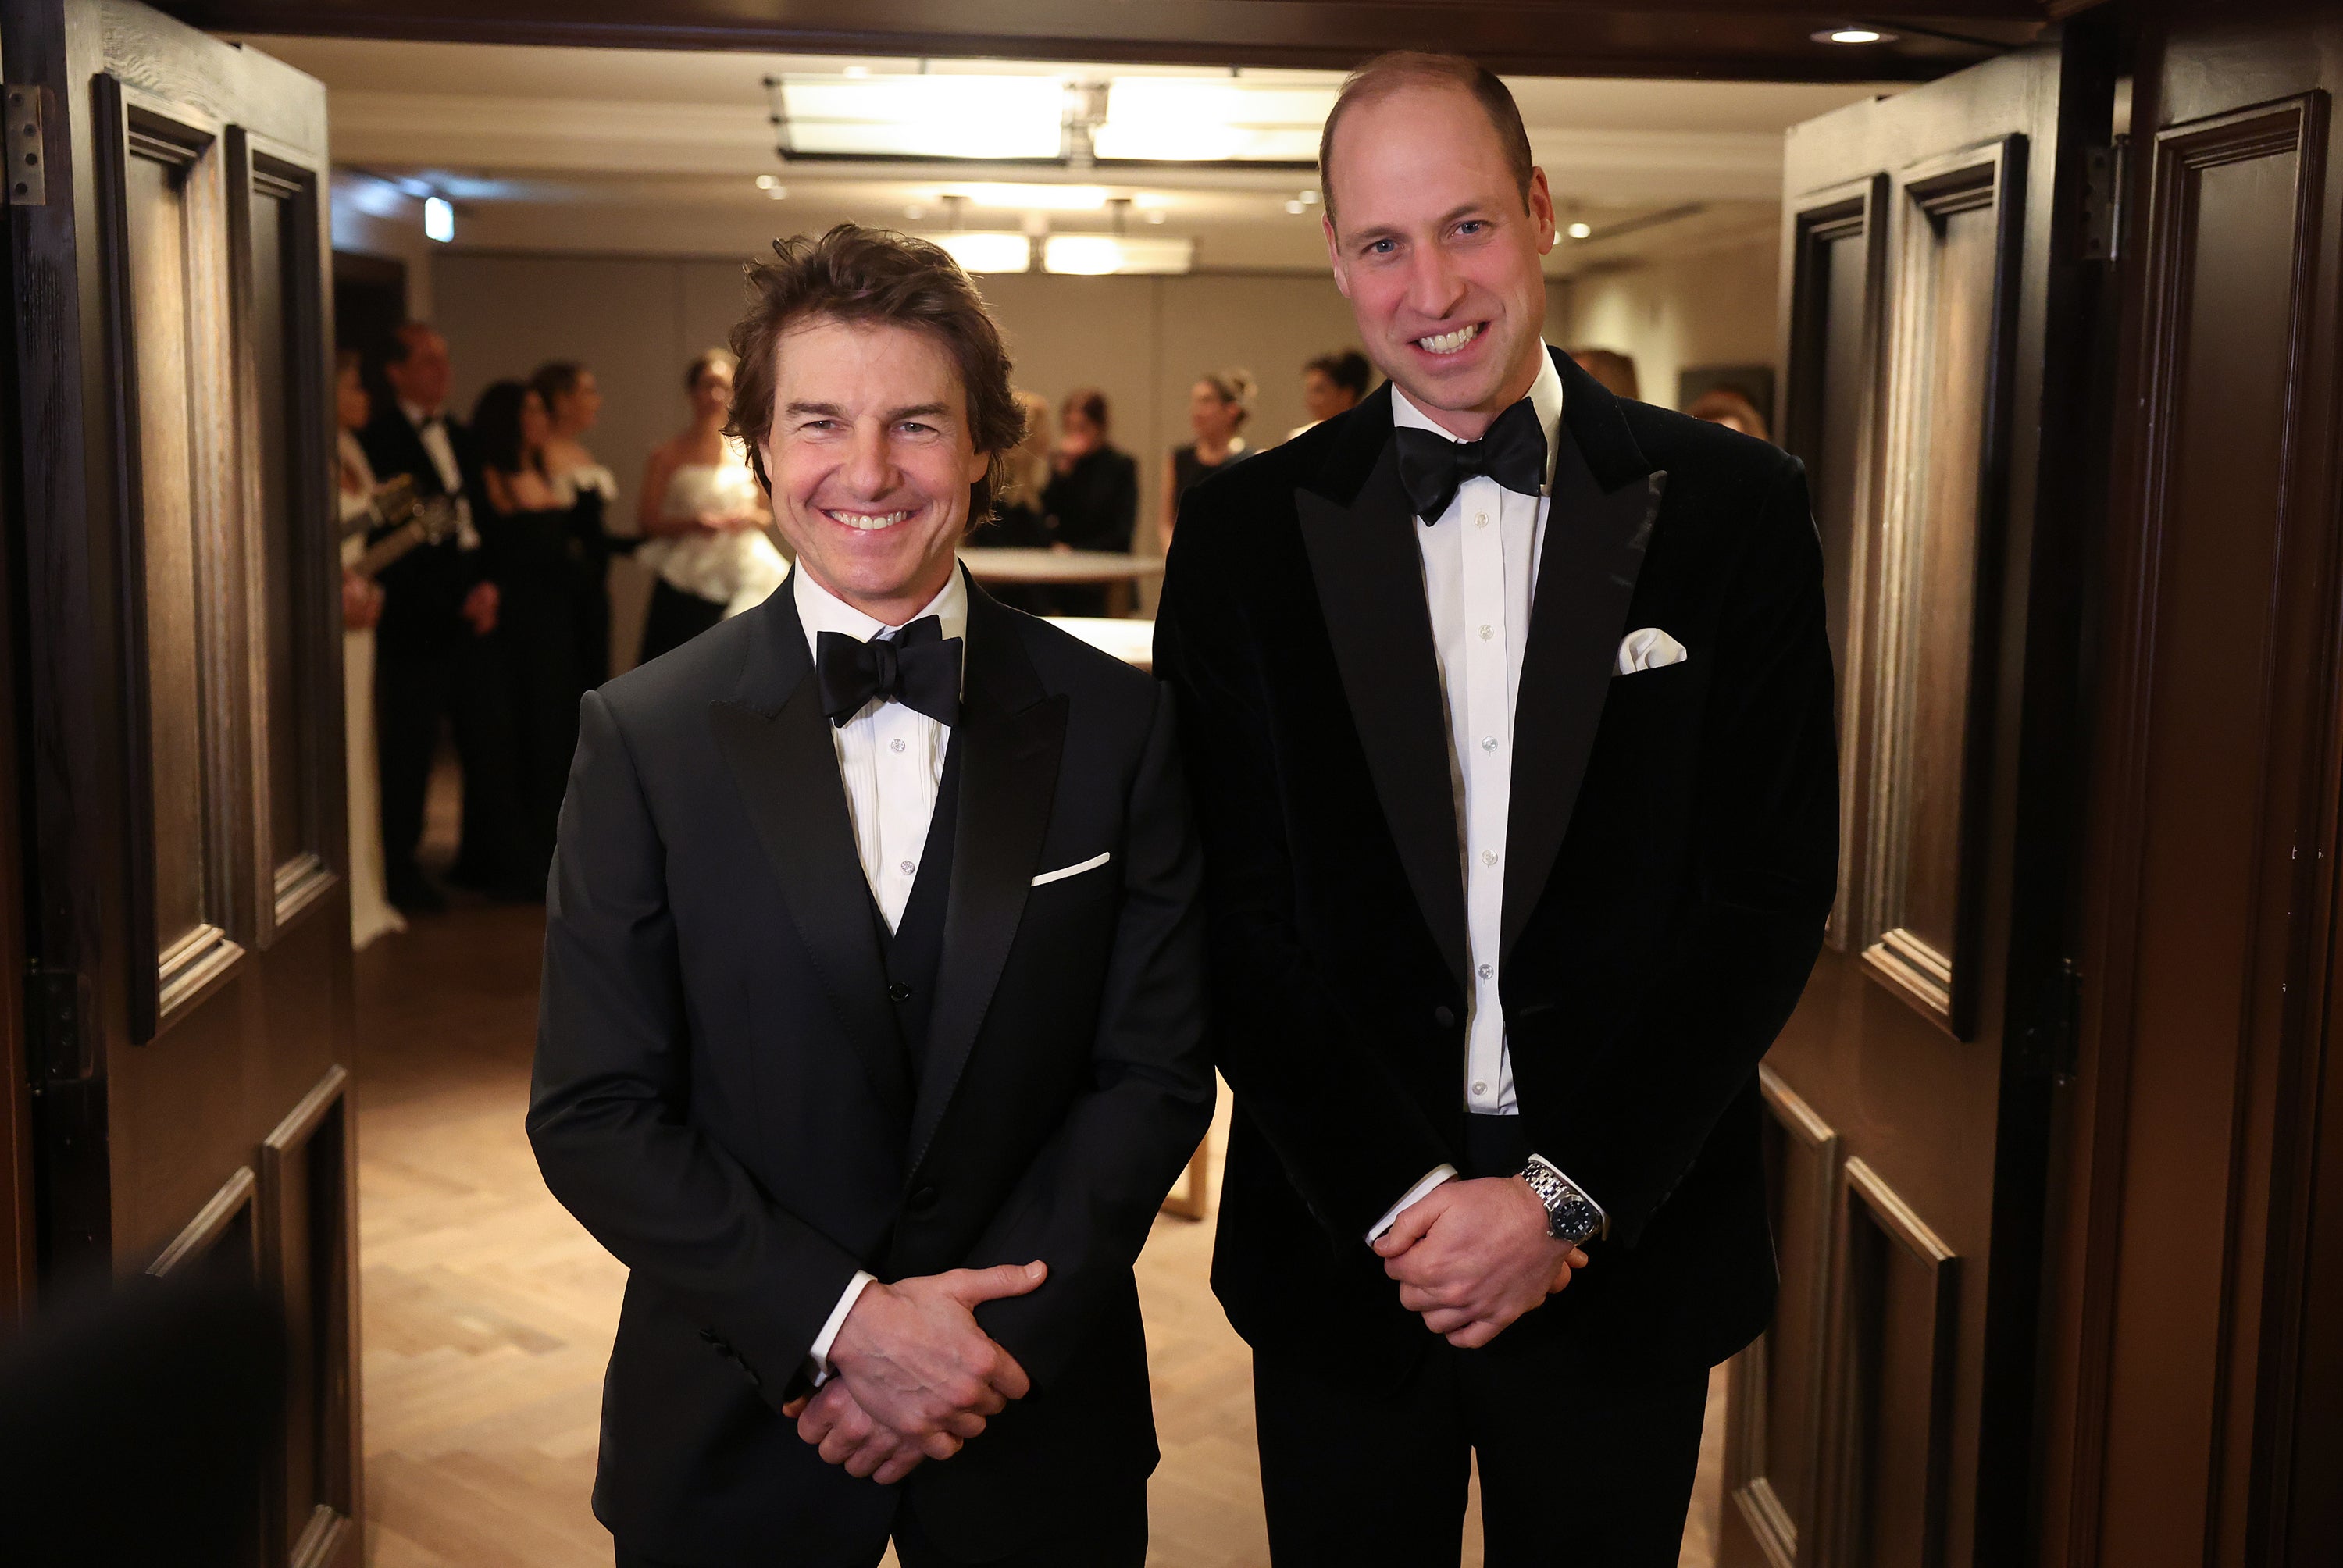 Among the guests at the gala dinner was Tom Cruise